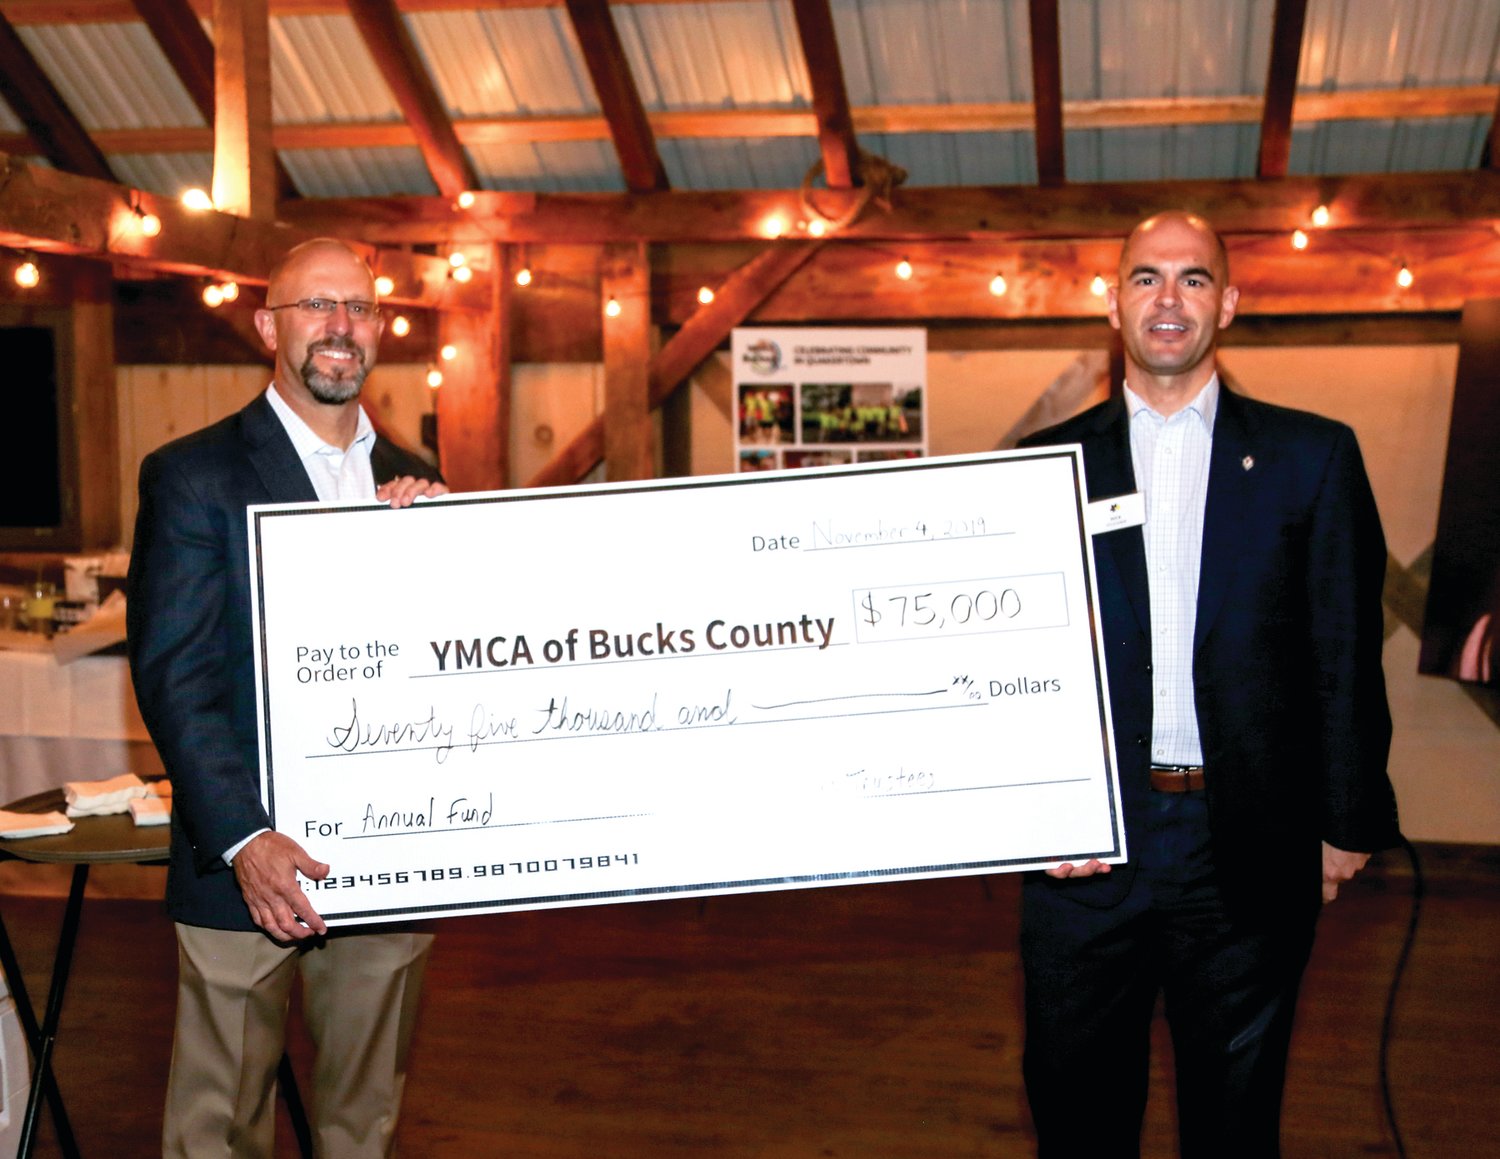 Zane Moore, president/CEO, and Nick Yelicanin, chief volunteer officer, both of YMCA of Bucks County, display the check representing the matching gift pledge.